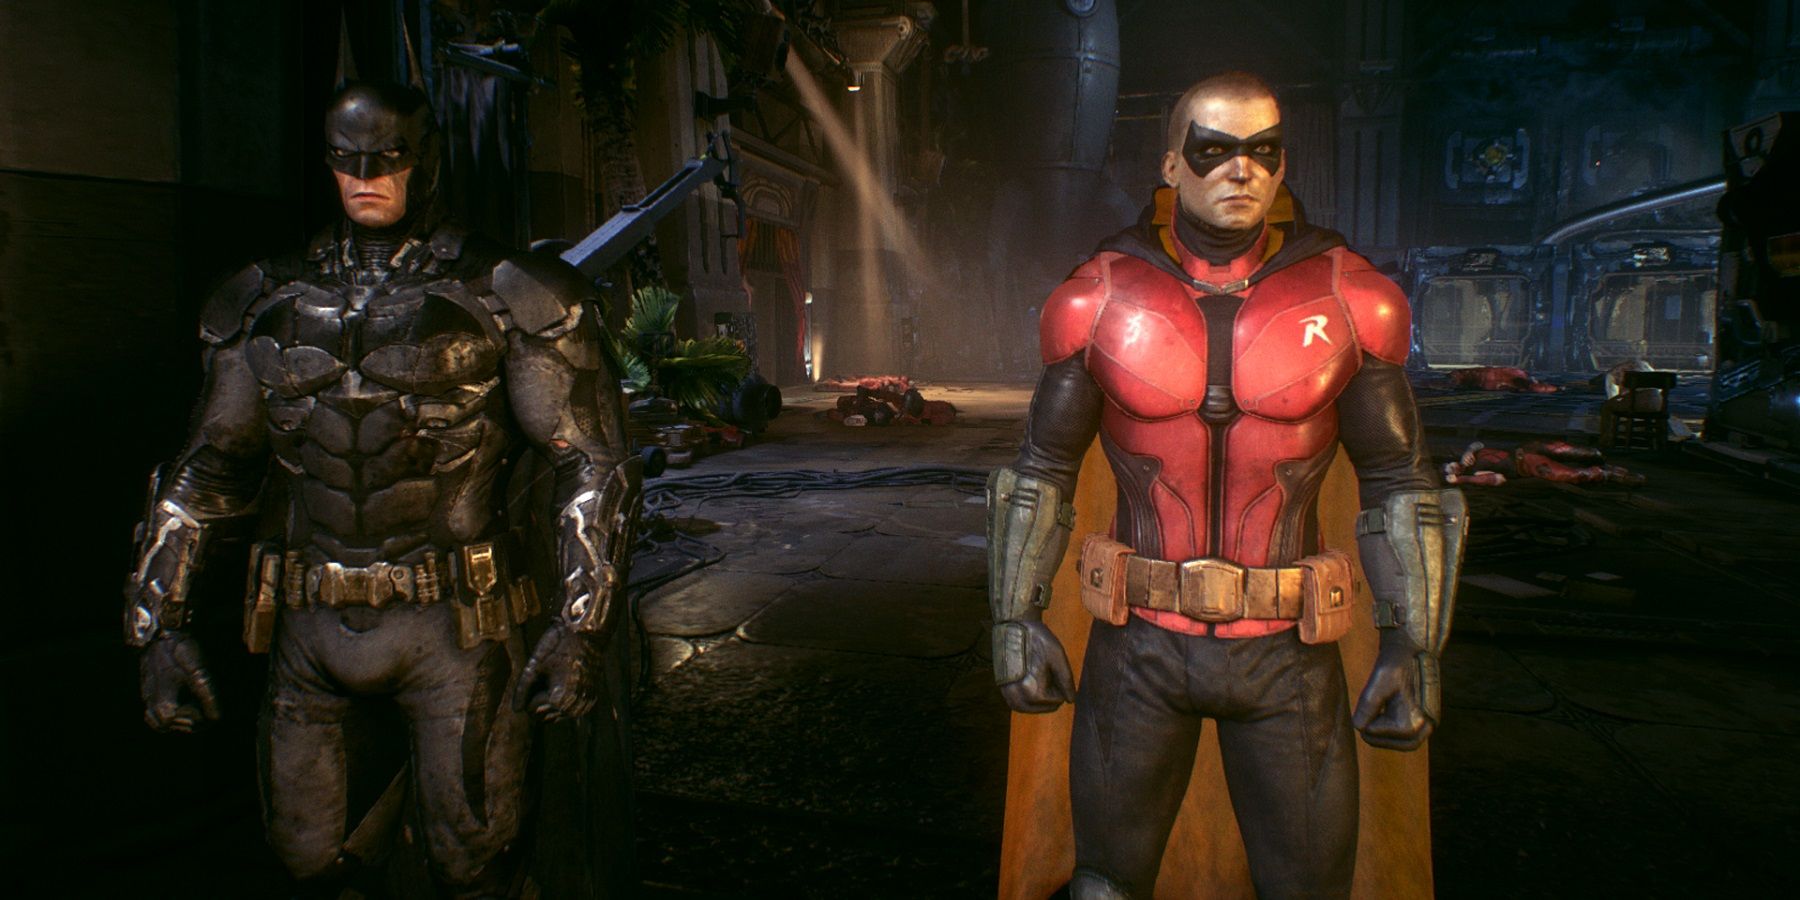 Batman and Robin from Batman: Arkham Knight standing ready for action.